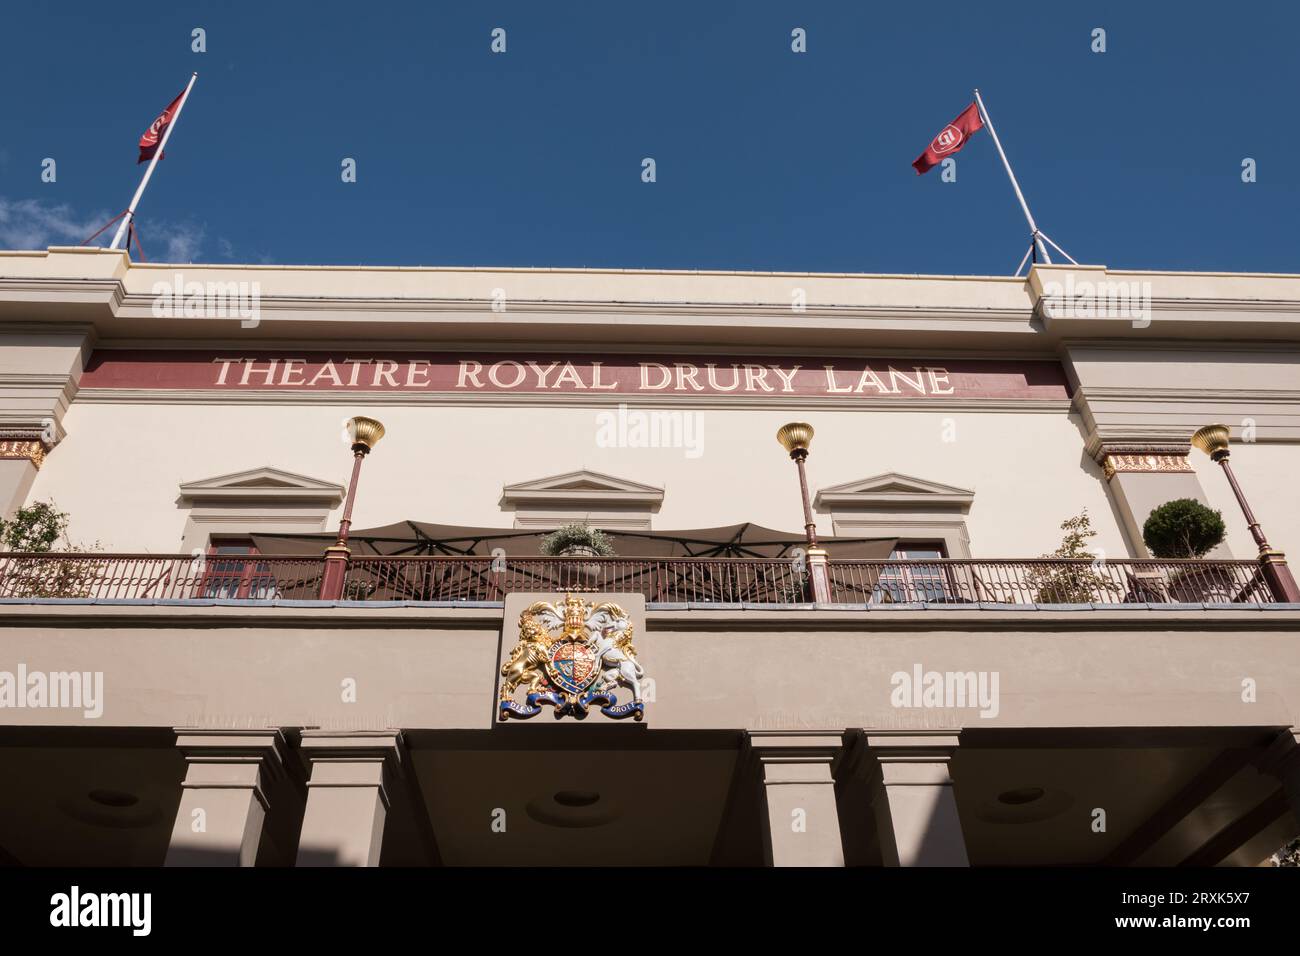 Closeup of the entrance and exterior of the Theatre Royal, Drury Lane, London, England, U.K. Stock Photo